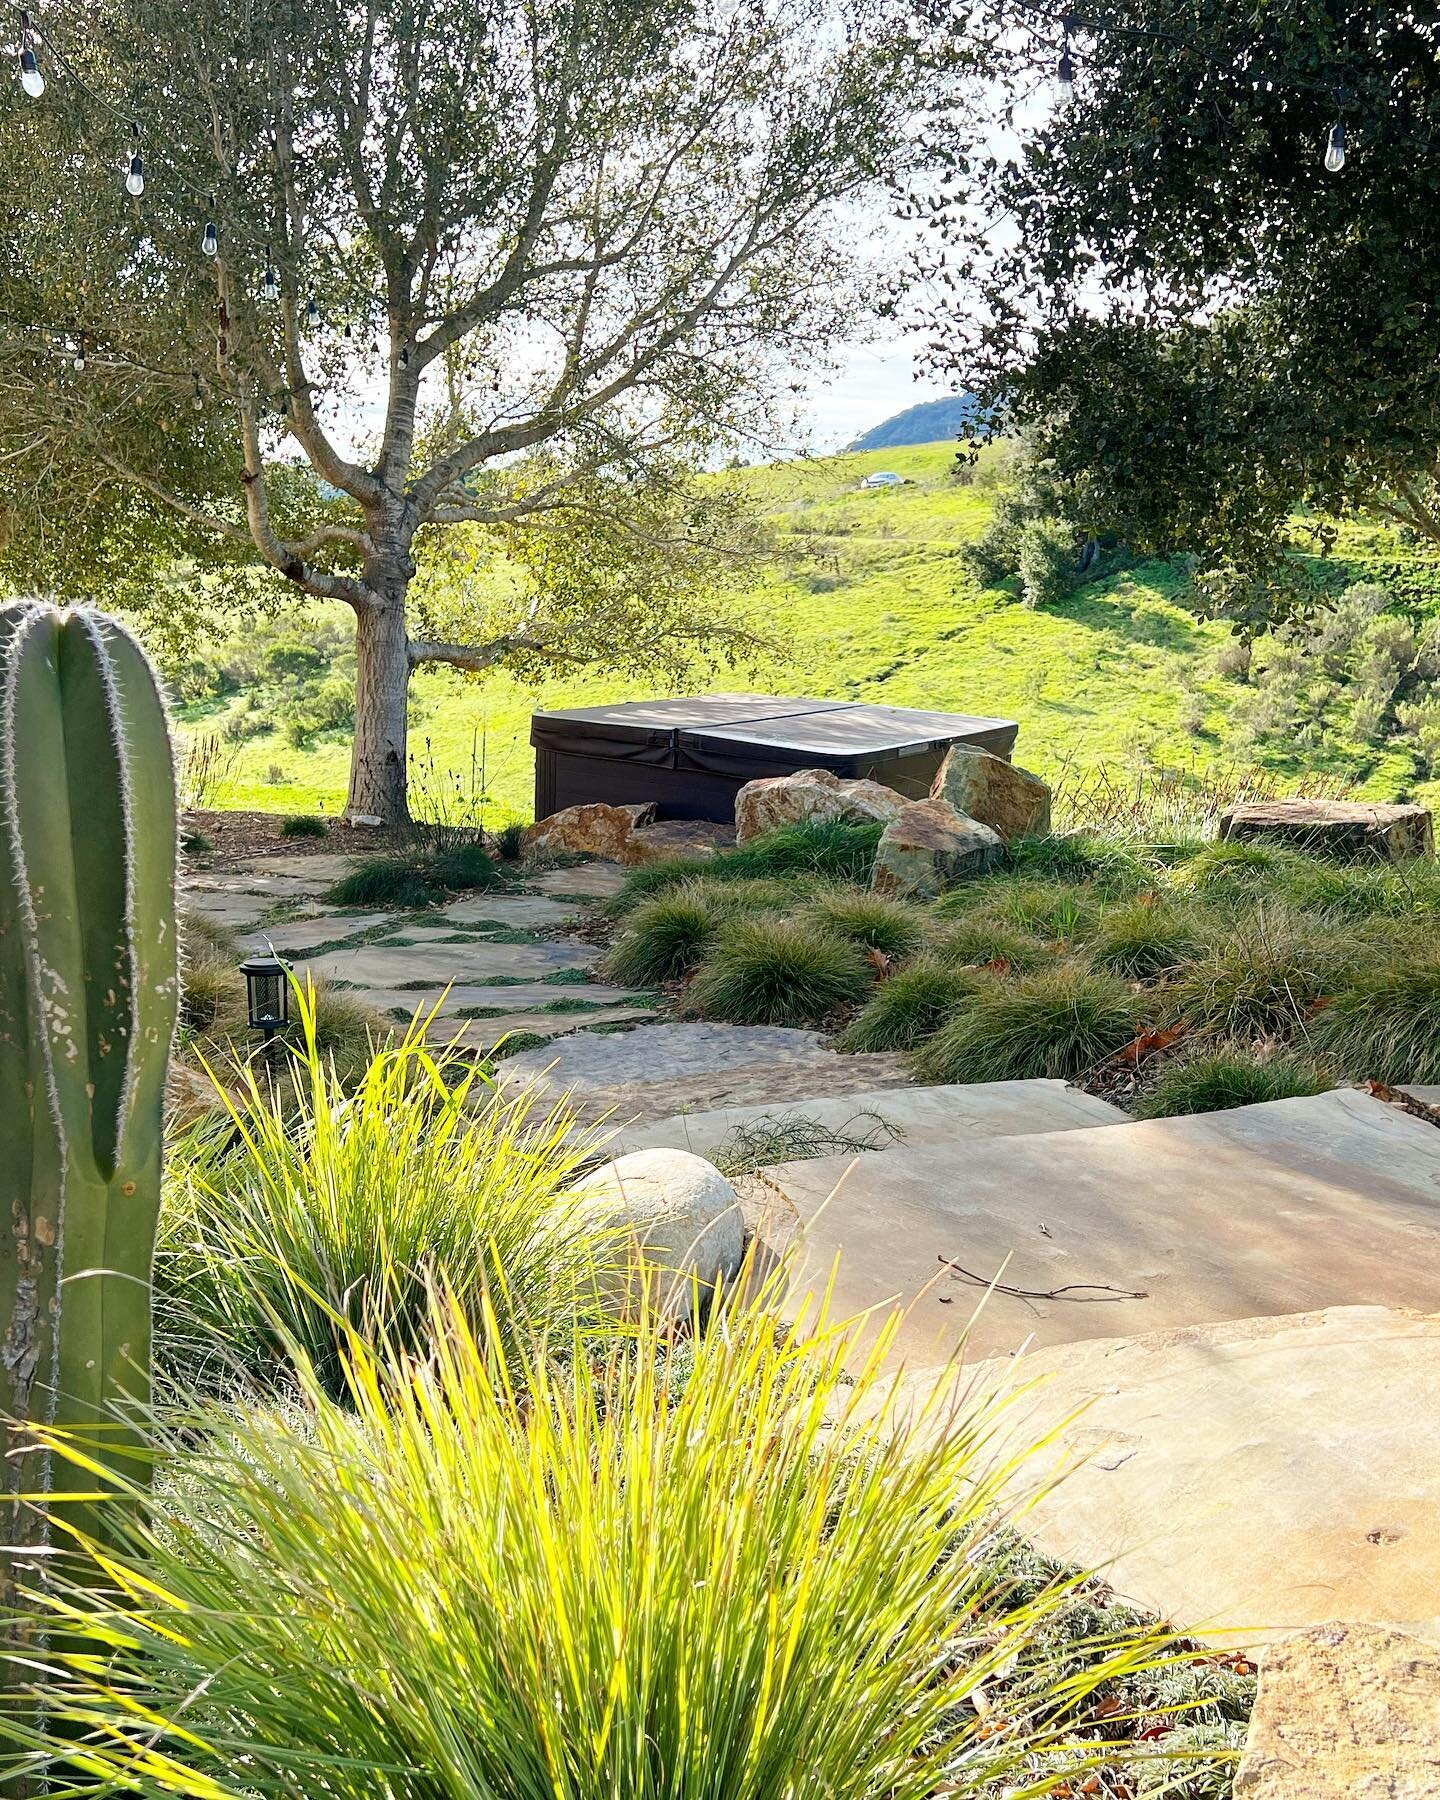 When you can have a hot tub with a premier view, you make the path to get there just as epic. 
.
.
.
#ncdesigns #landarch #thisislandscapearchitecture #landscapearchitecture #landscapedesign #coastaldesign #sanluisobispo #slolife #805living #shareslo